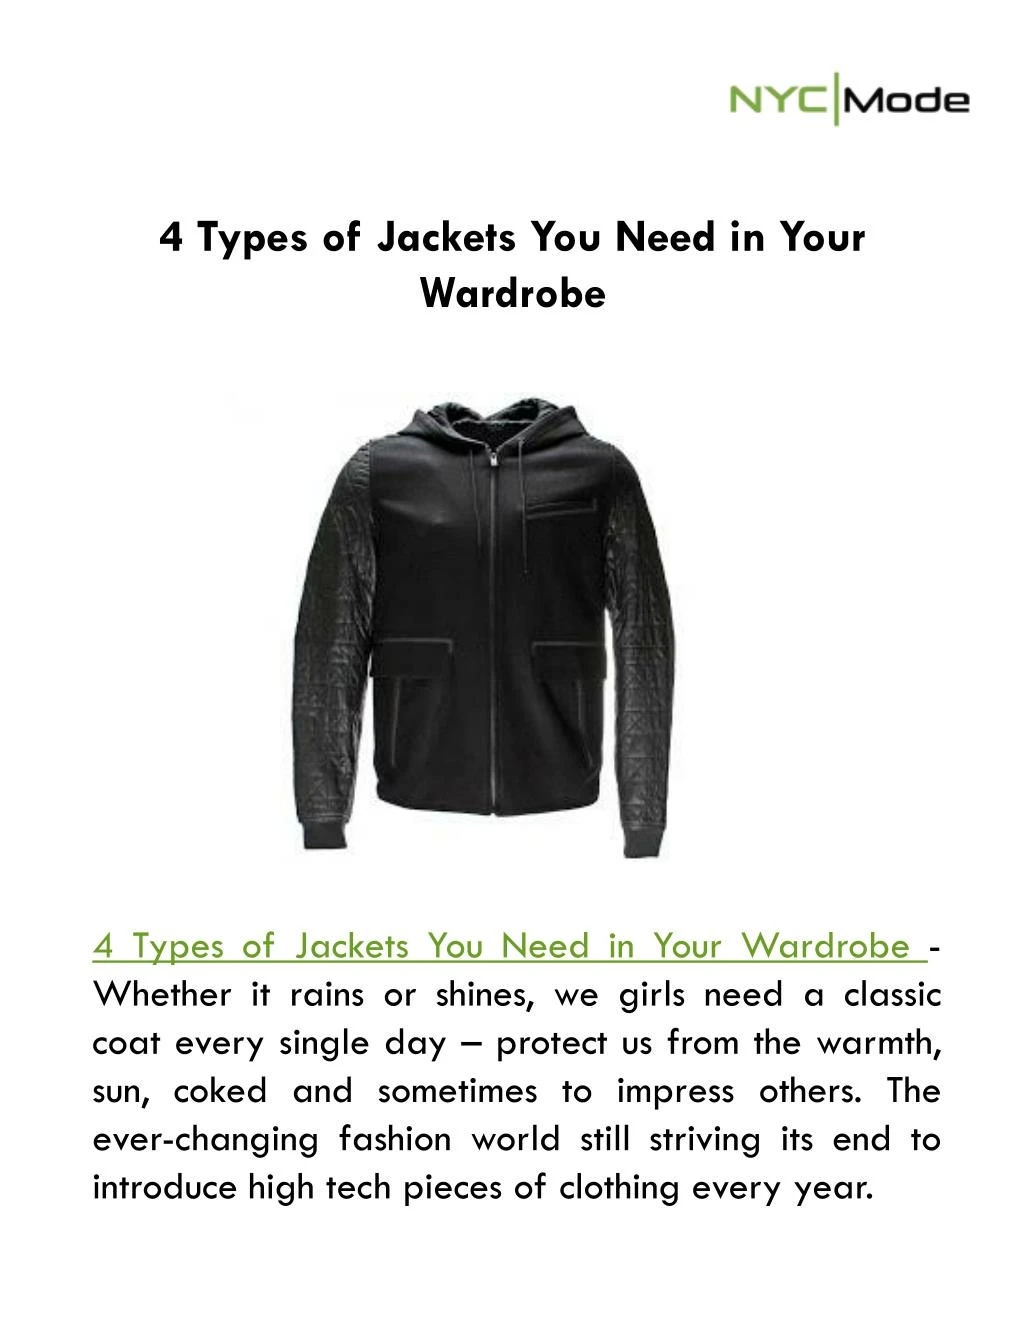 4 types of jackets you need in your wardrobe